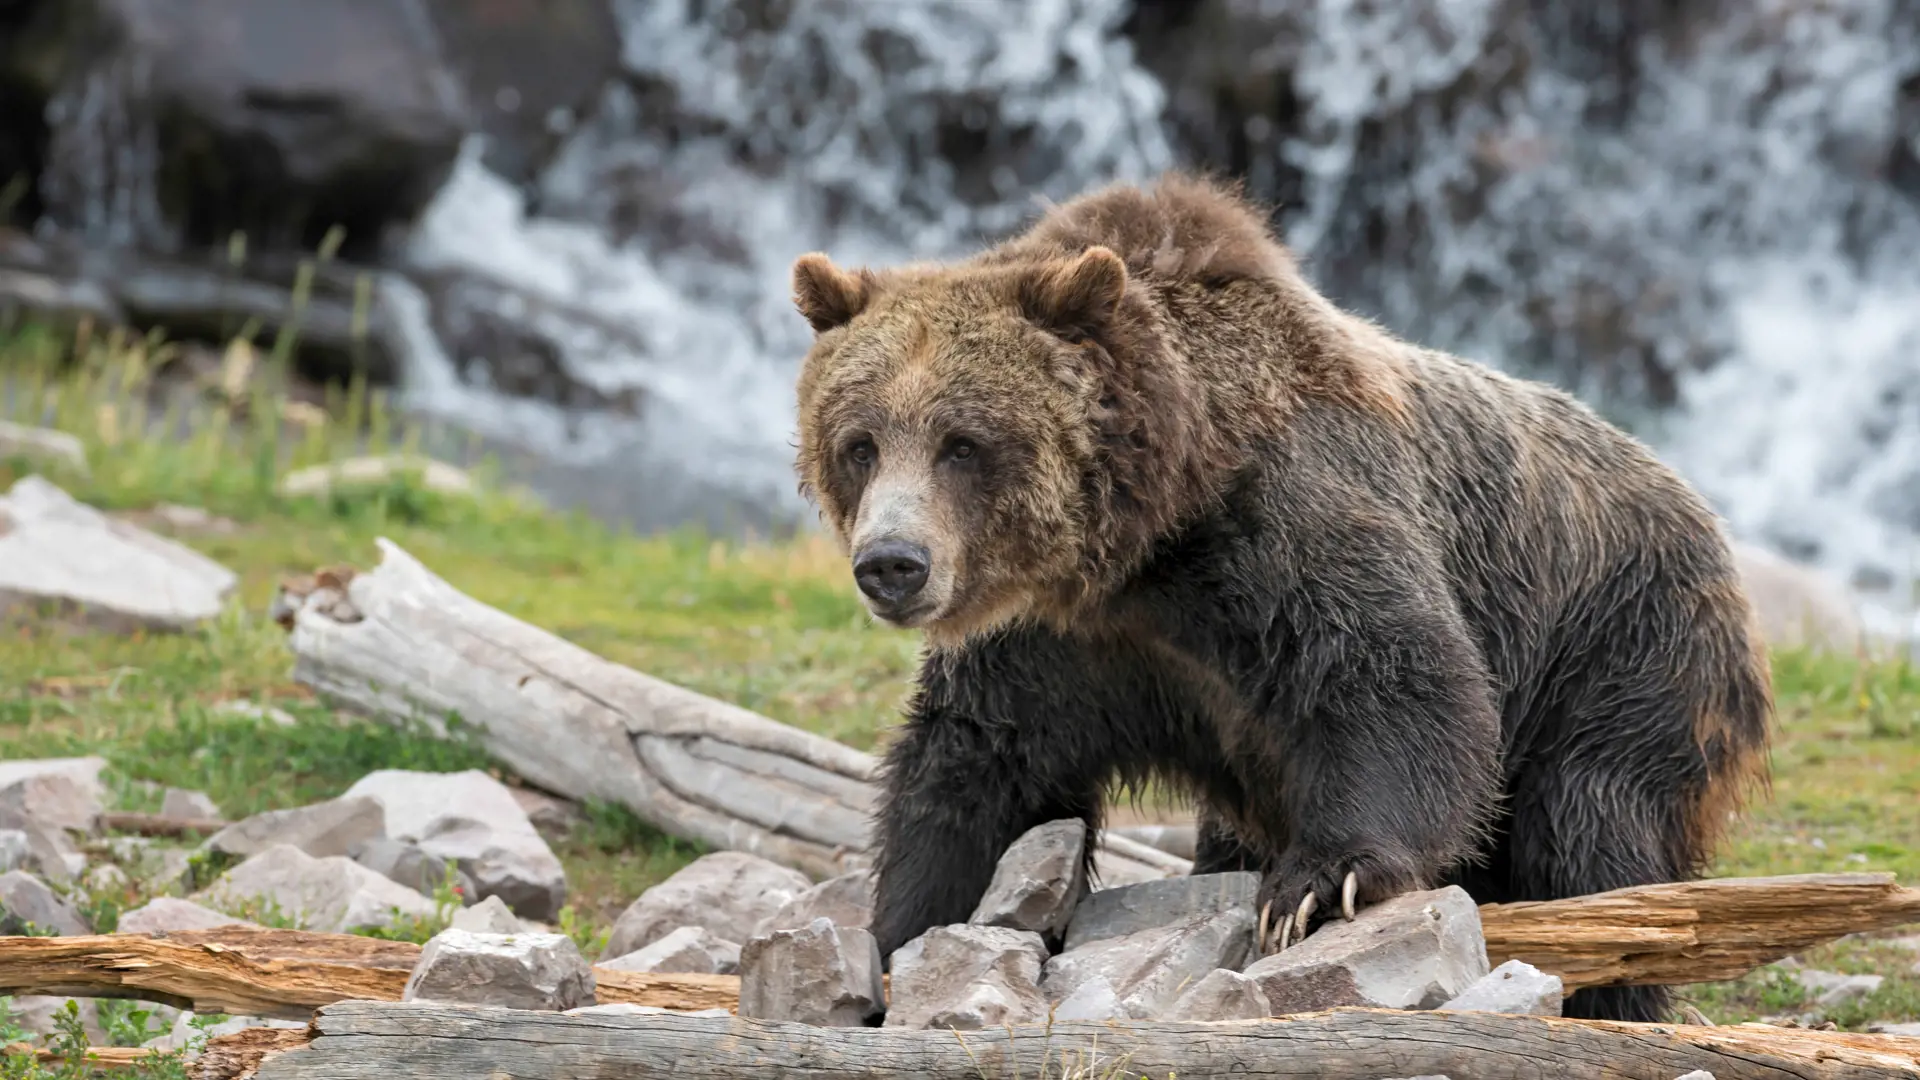 shutterstock_154772894 Grizzly bear in Yellowstone National Park, Wyoming.jpg